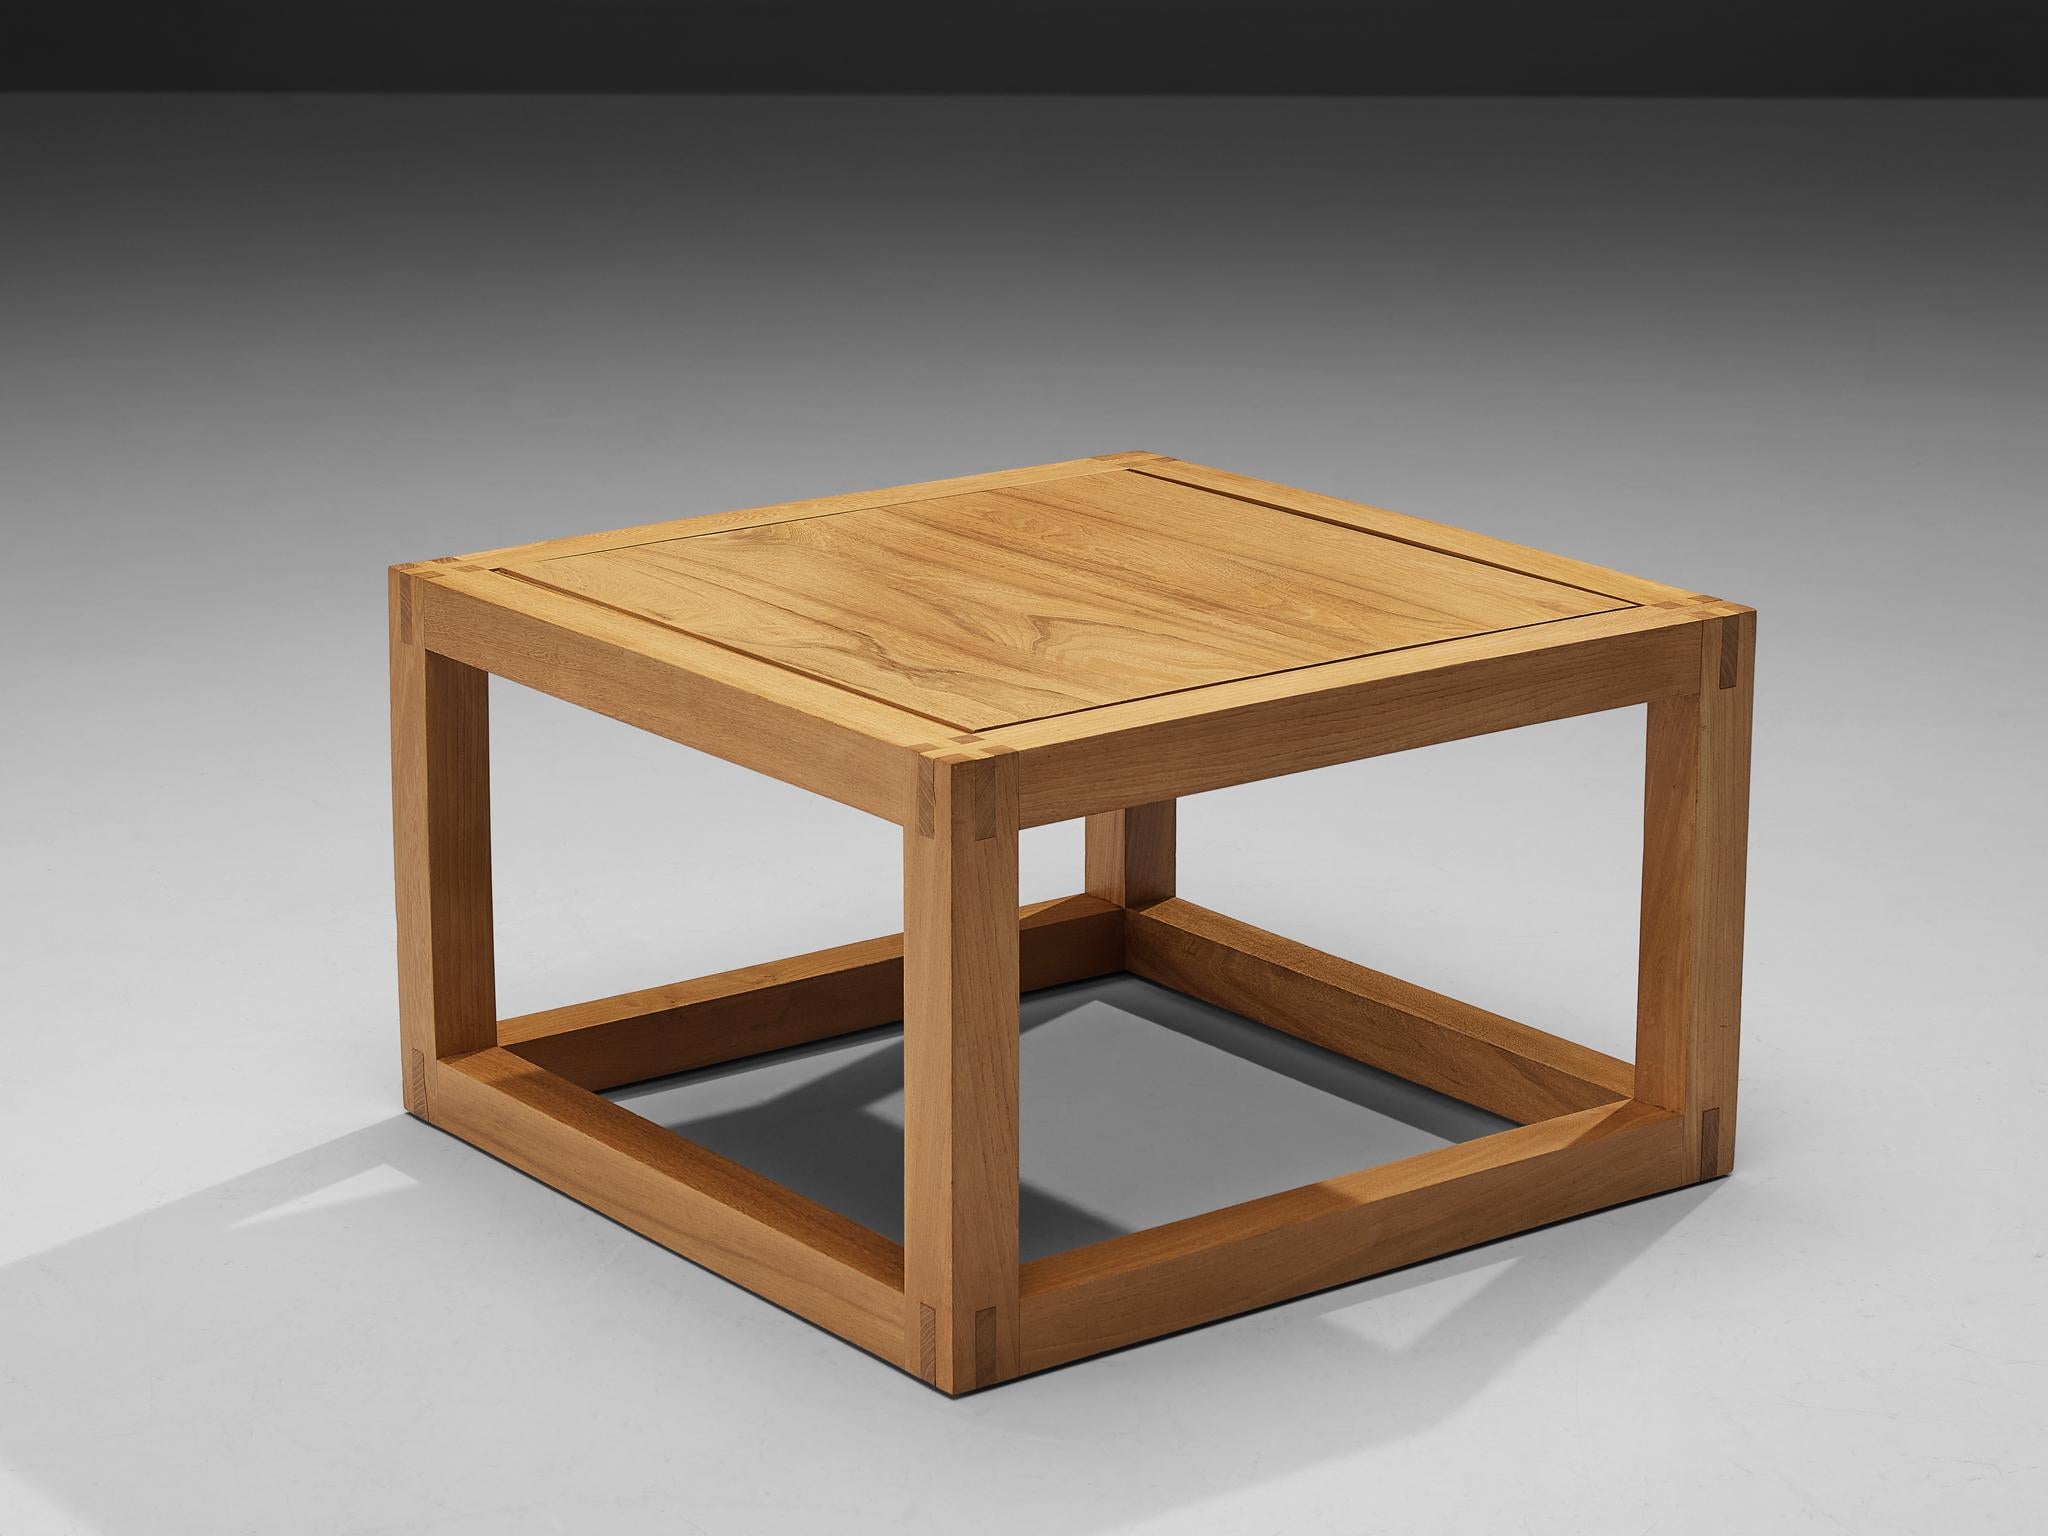 Maison Regain, side table, solid elm, France, 1970s

Side coffee table with admirable wood joints by French manufacturer Maison Regain. A square builds the main theme and repetitive form of this side table. The squared top rests in a frame of the